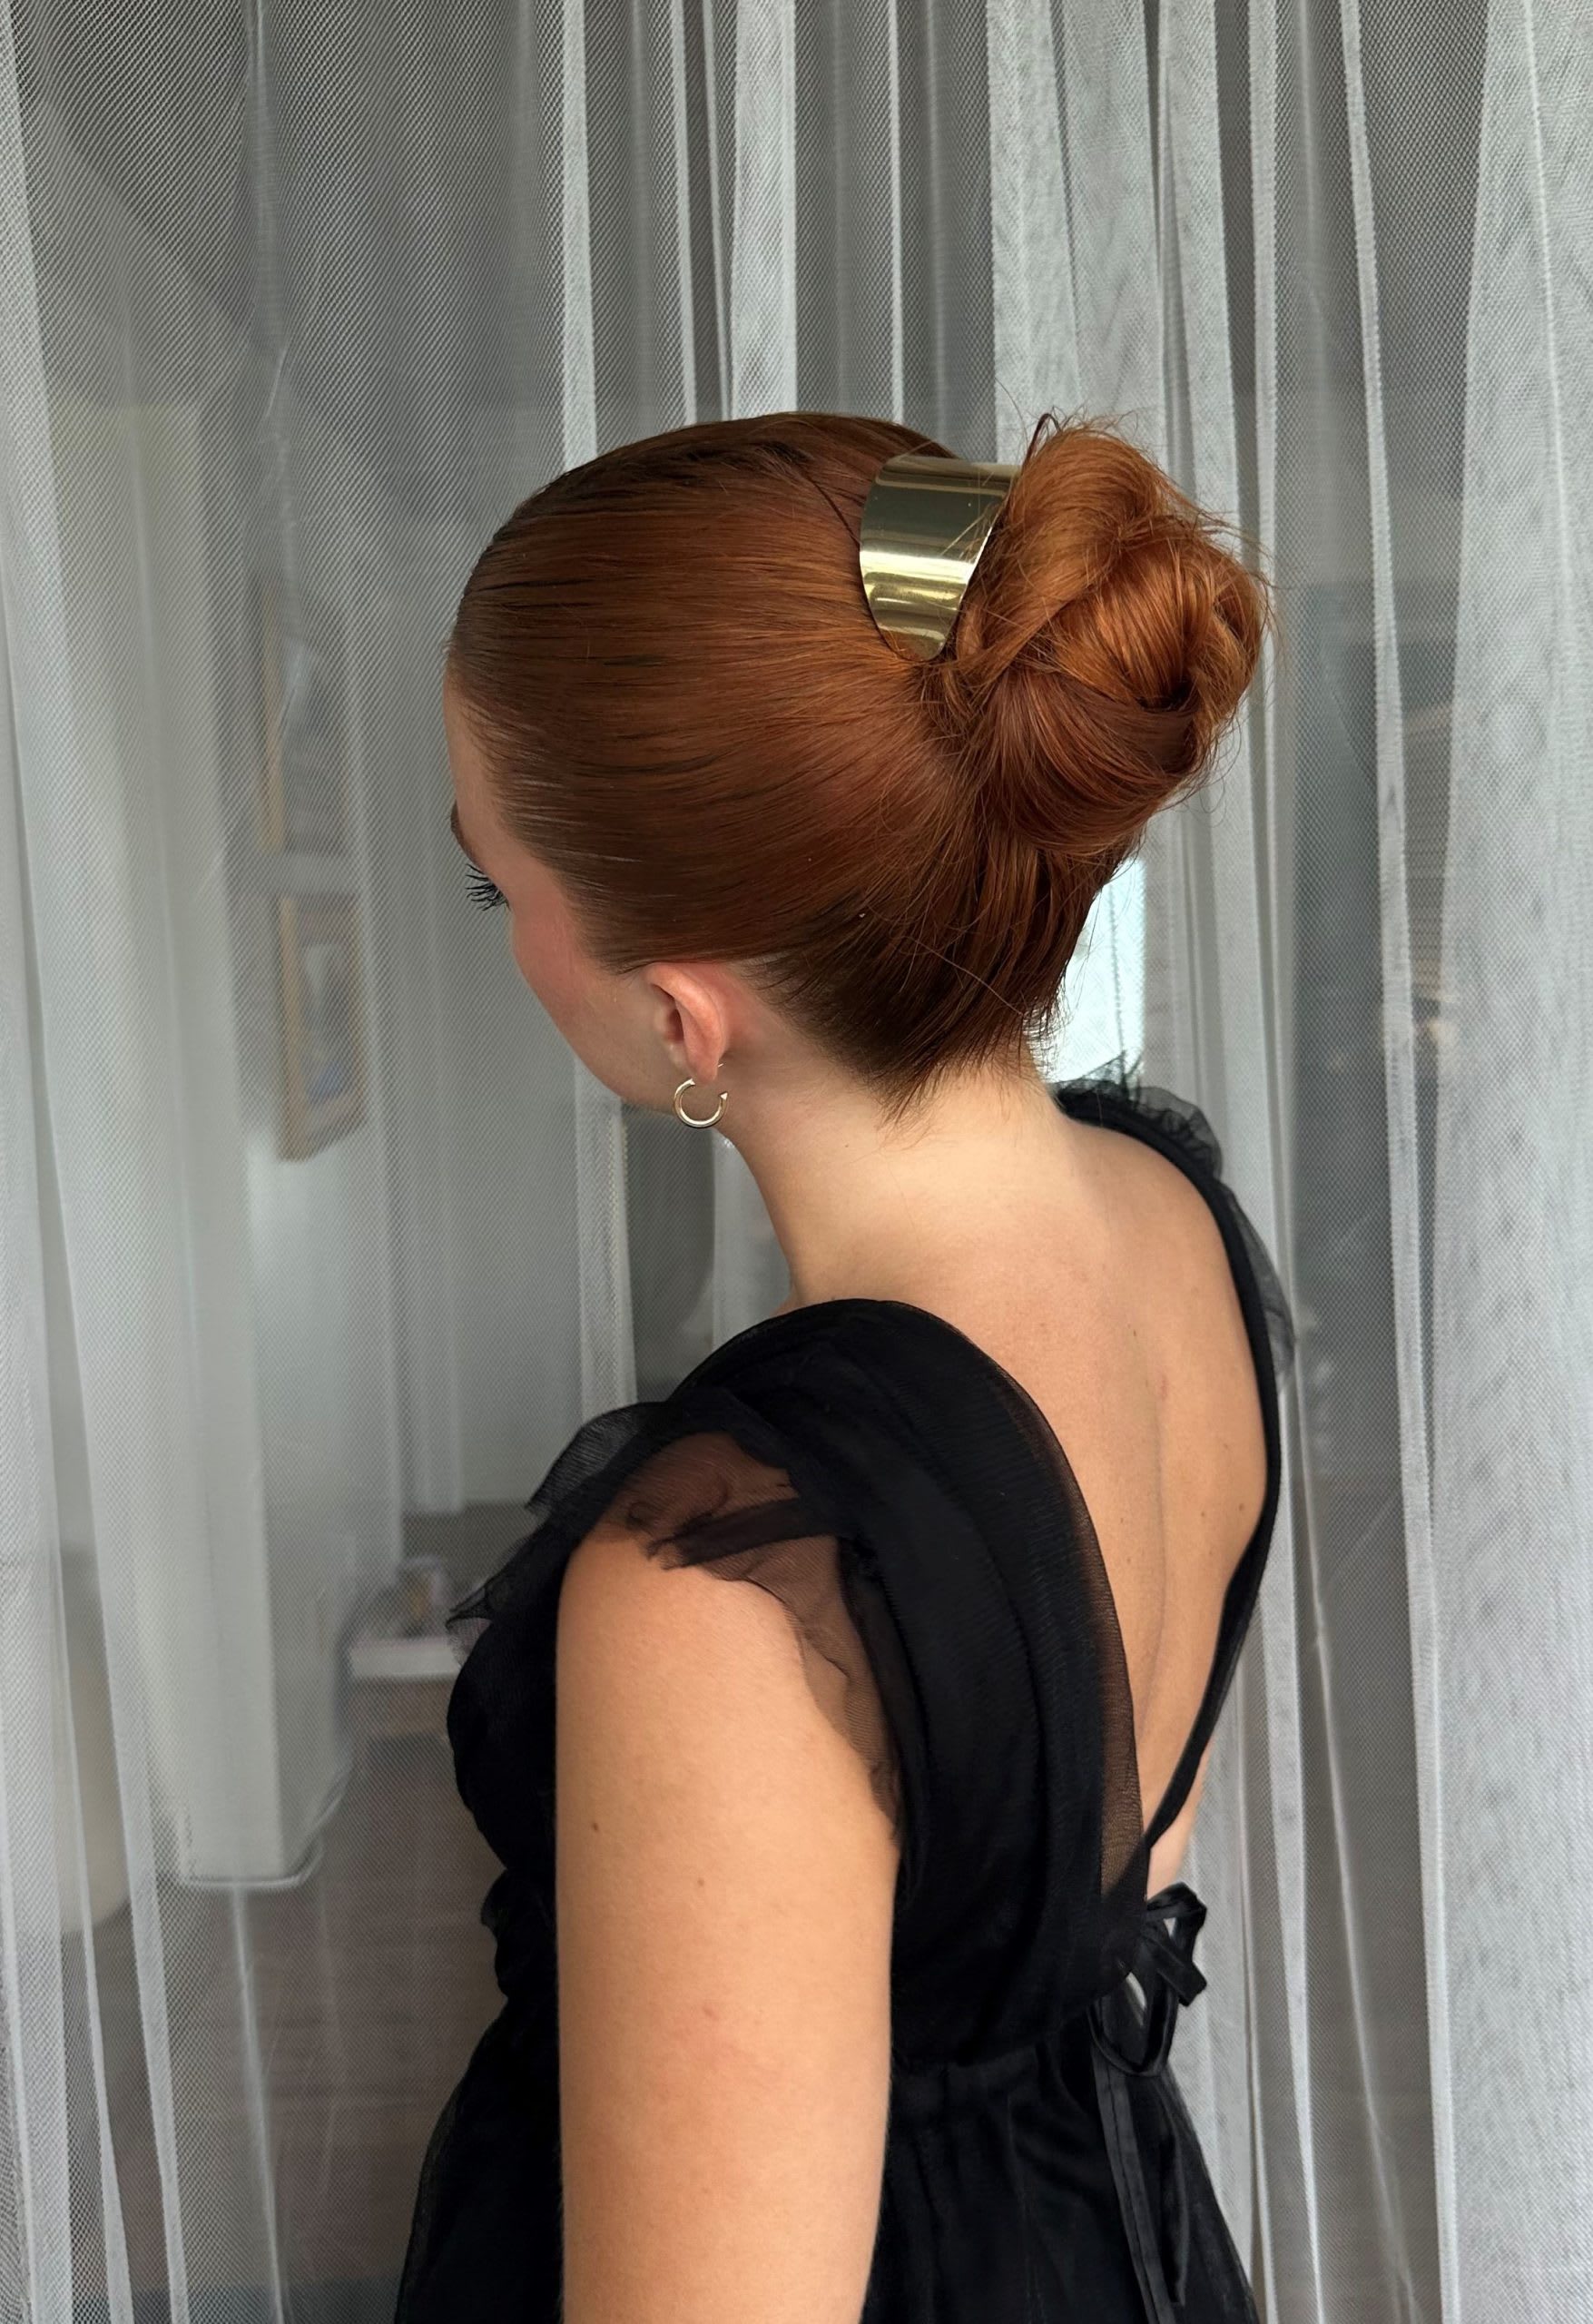 The 'Off-Duty' Bun Has Become The Go-To Celeb Hairstyle | Glamour UK